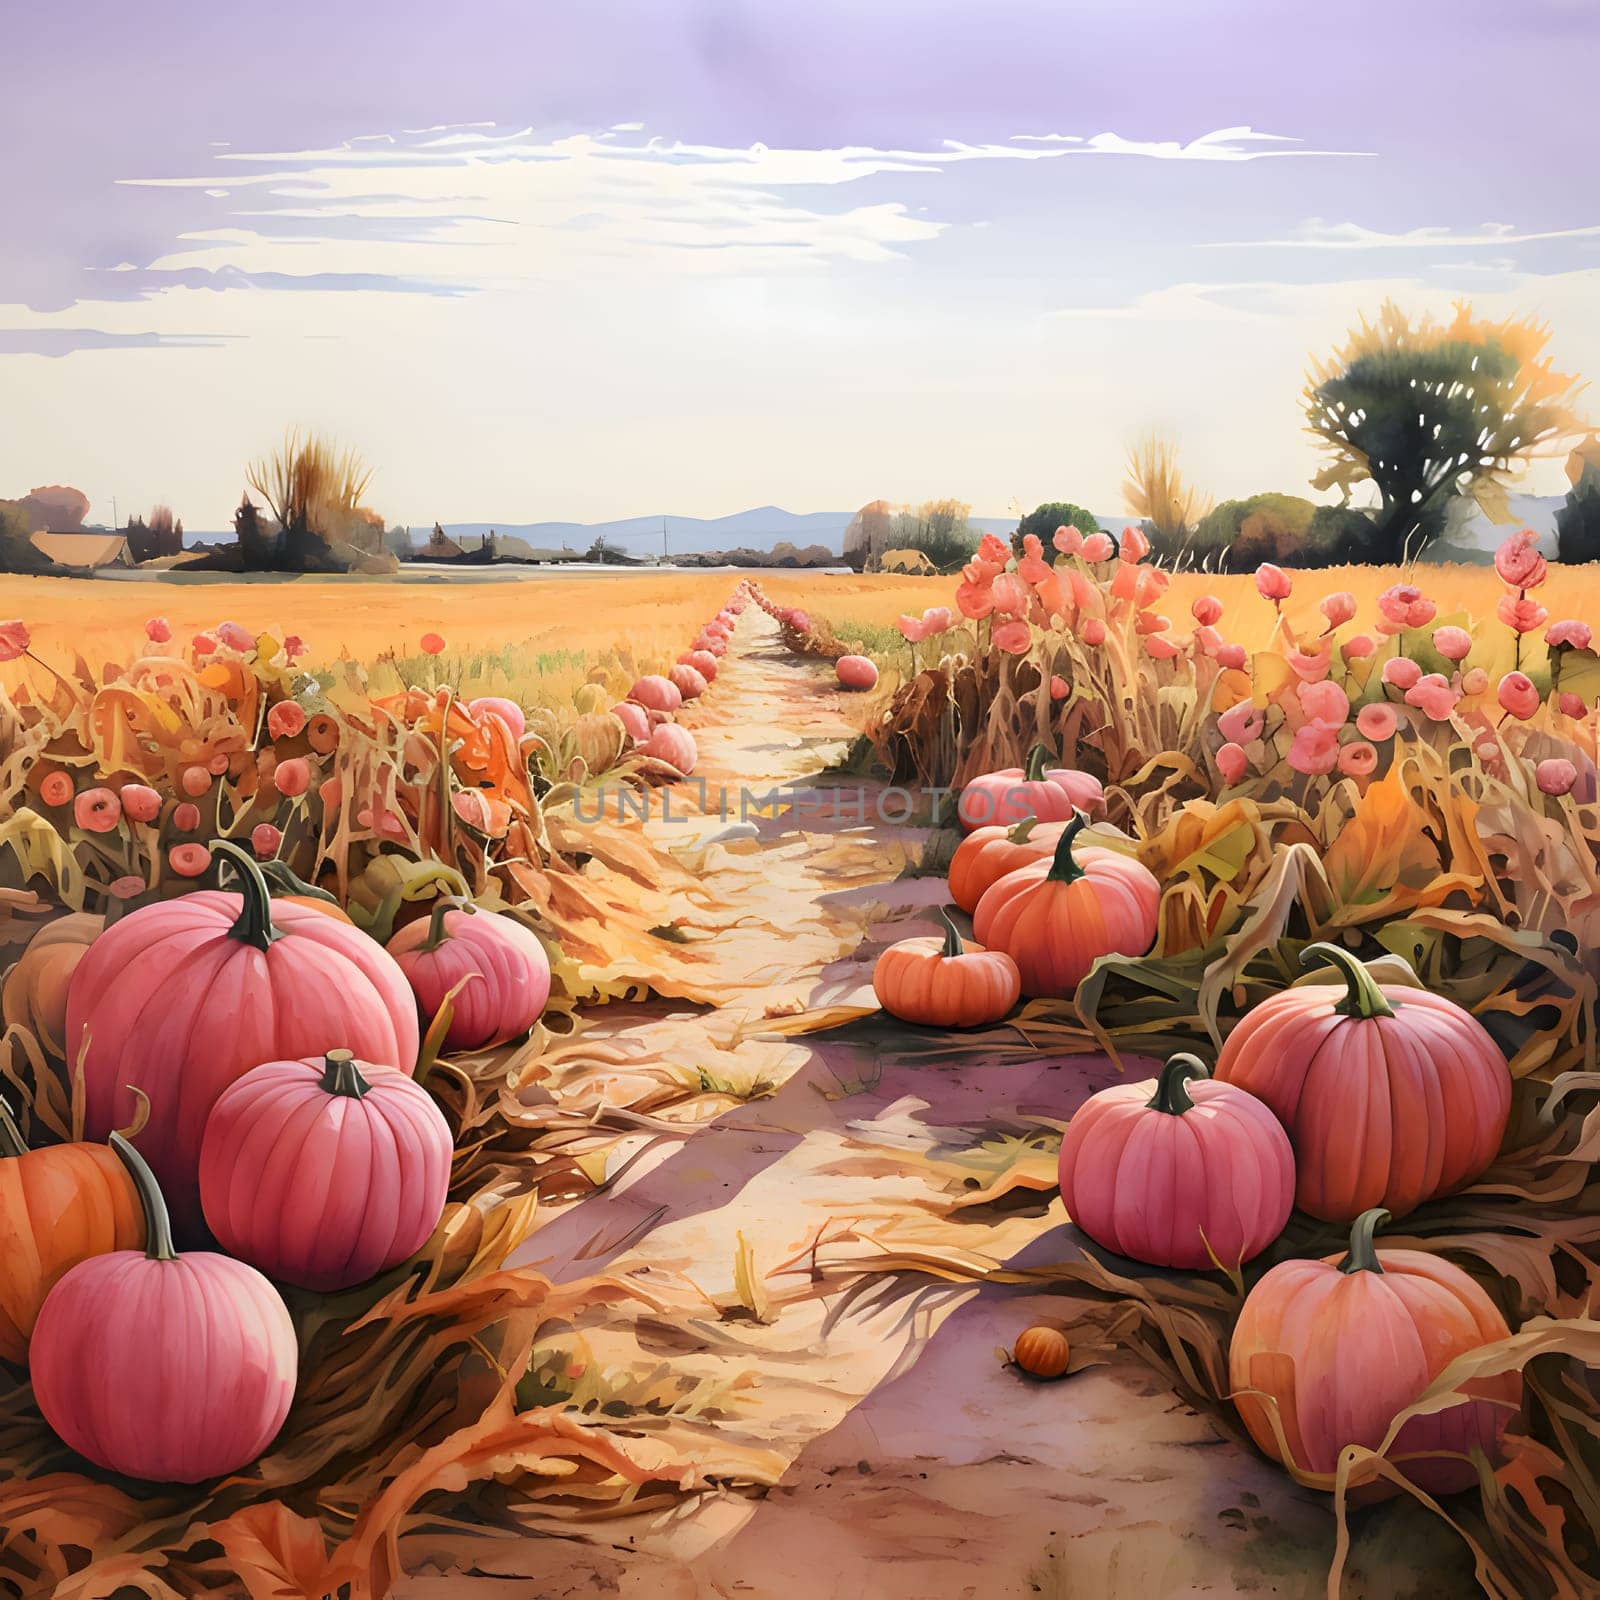 Illustration; pumpkin field around pink and orange painted pumpkins. Pumpkin as a dish of thanksgiving for the harvest. by ThemesS